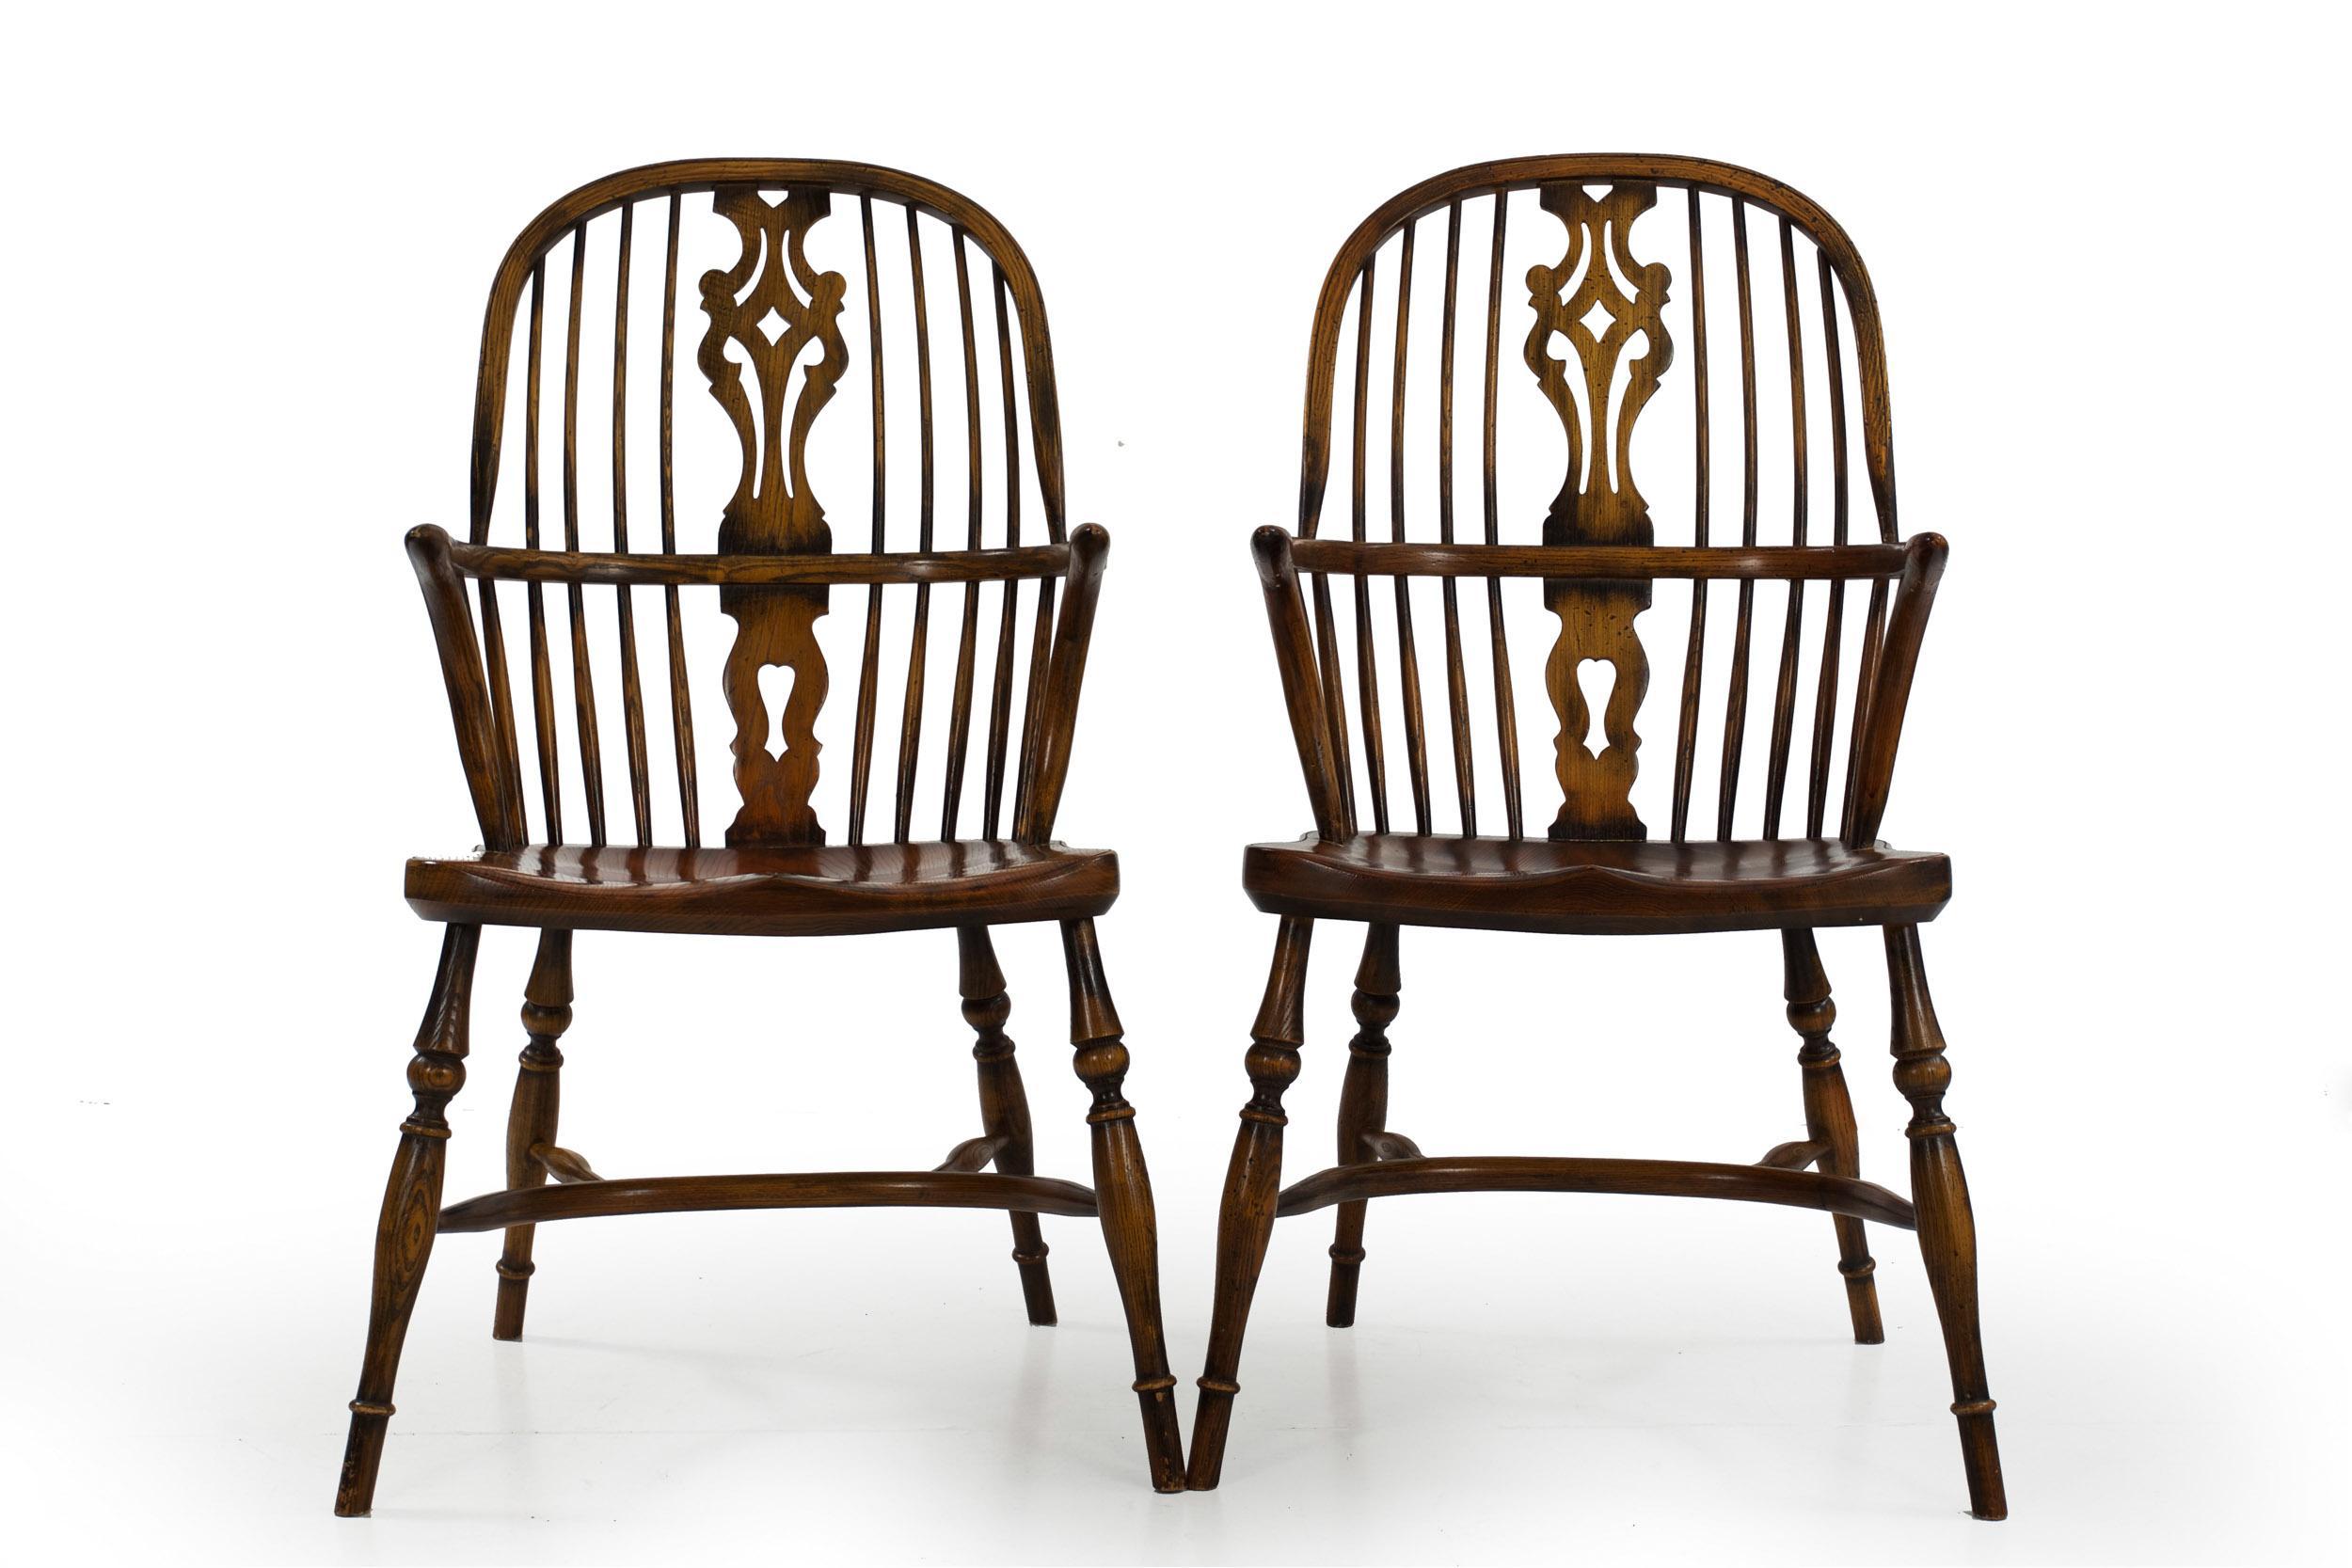 A beautifully benchmade set of eight Windsor-style dining chairs in the English taste, they are crafted with a careful eye to period details throughout. They are all designed as arm chairs with steam-bent hoop rail over eight tapered and swollen